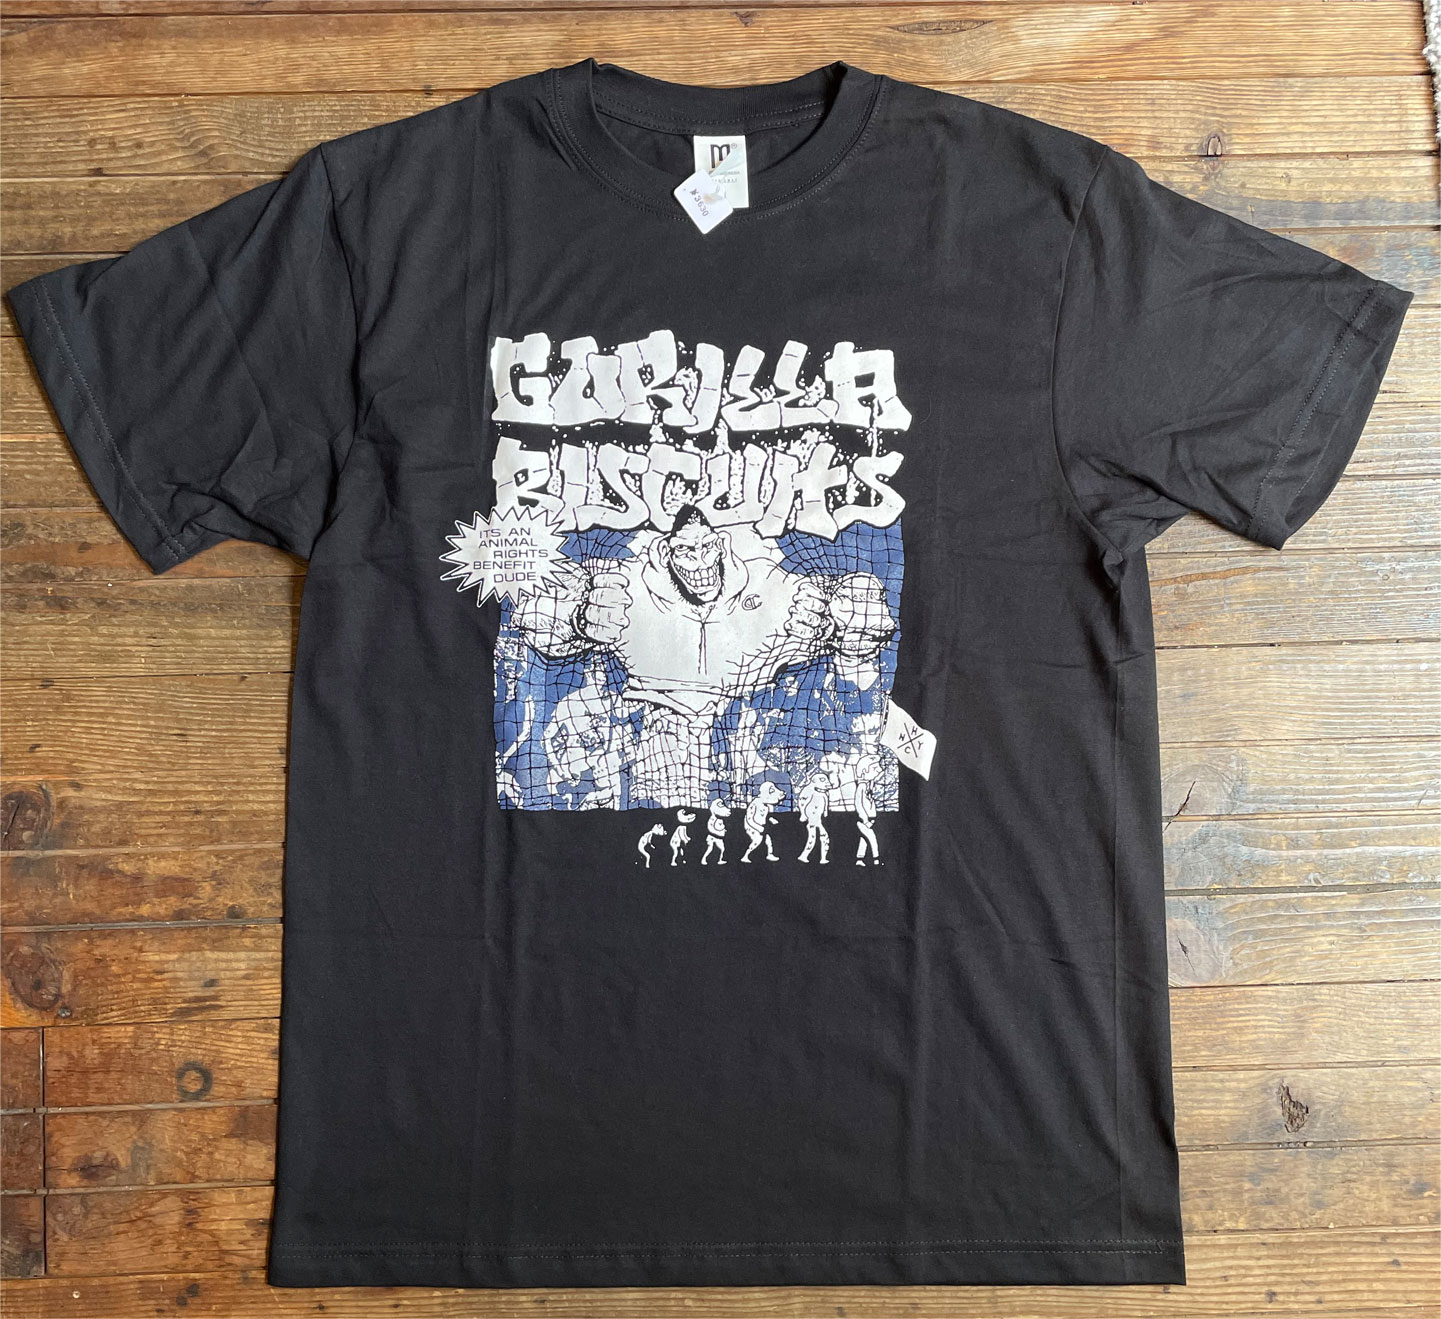 GORILLA BISCUITS Tシャツ ANIMAL RIGHTS